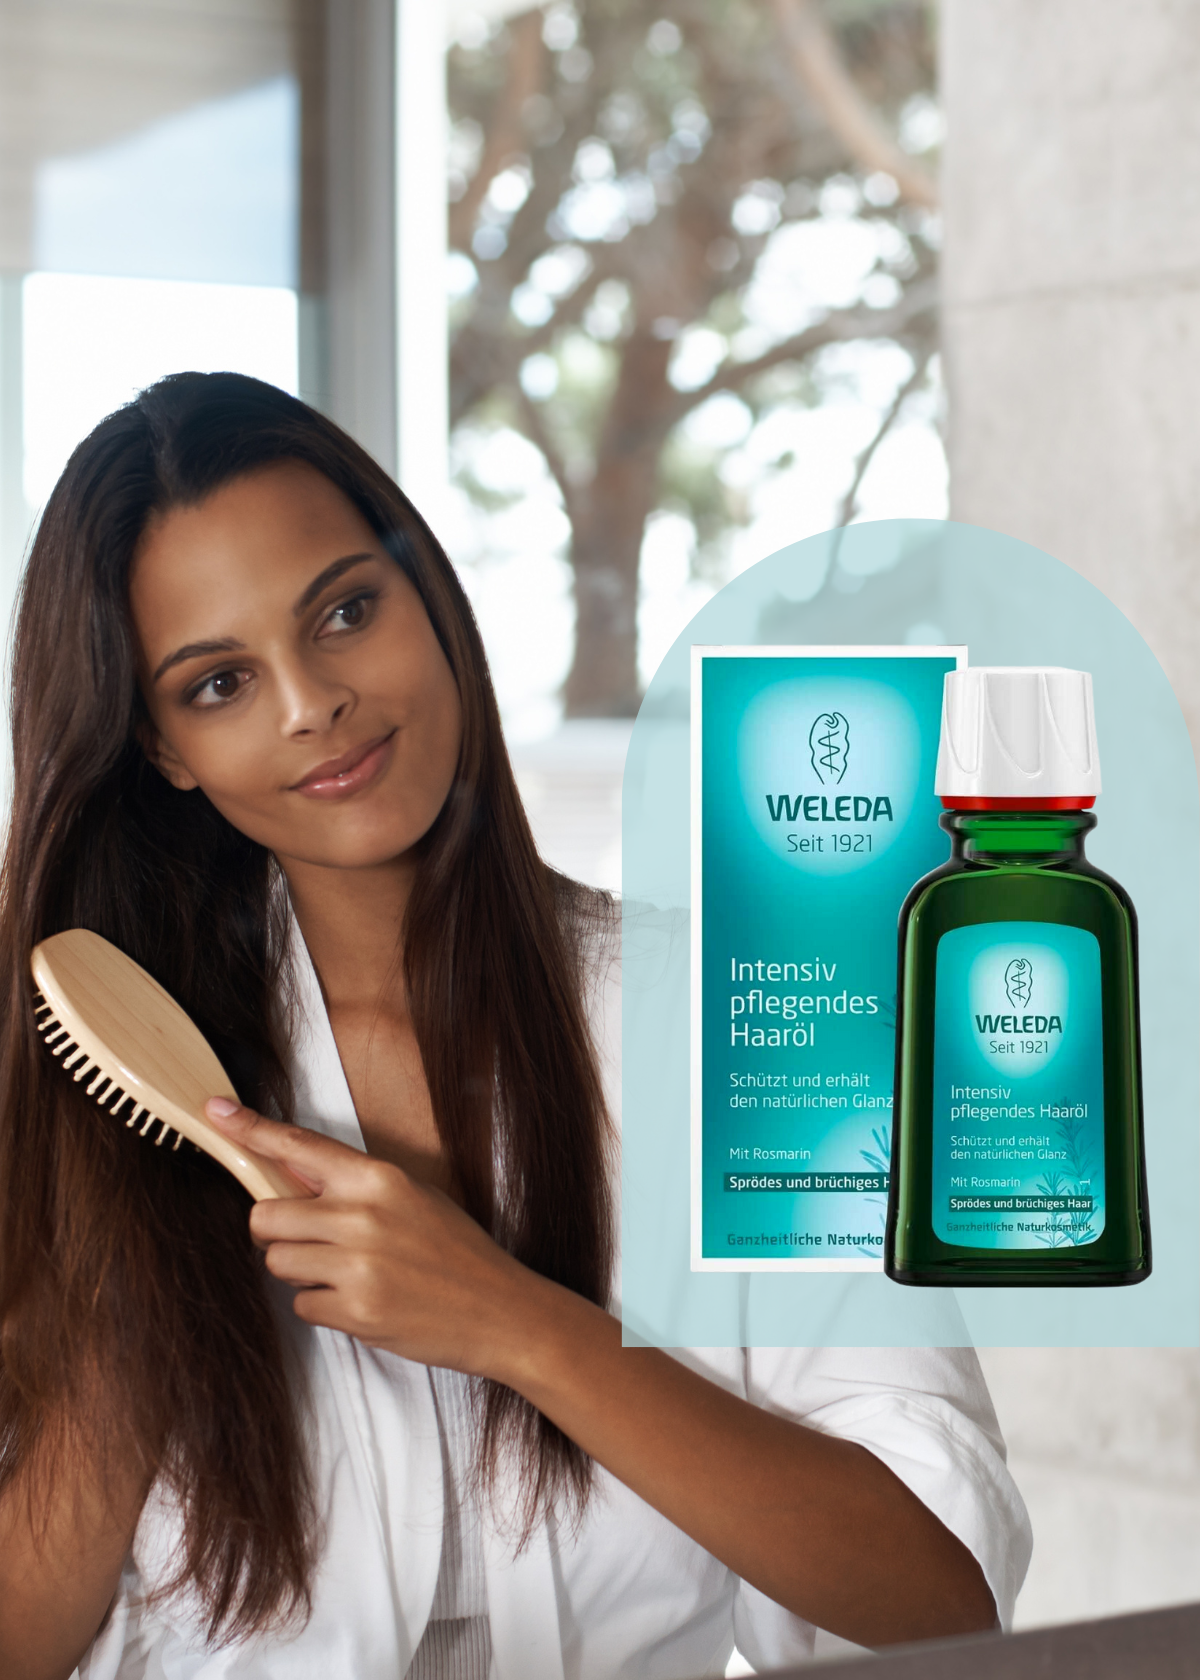 Weleda Rosemary Hair Oil: A Comprehensive Review for Buyers